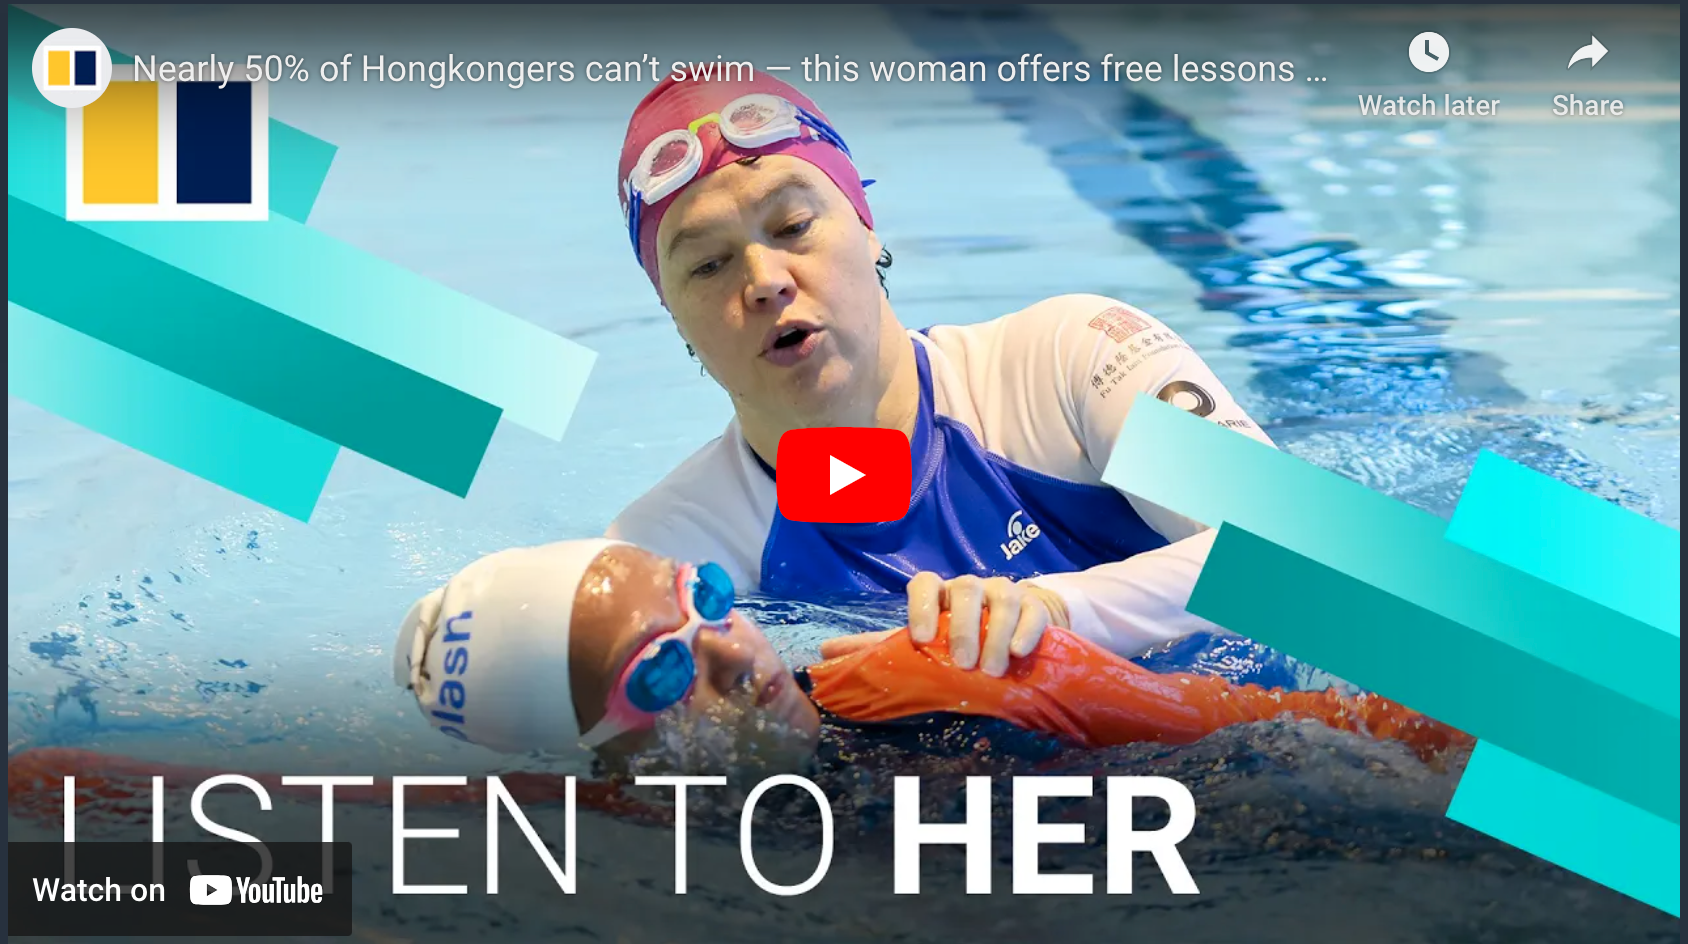 SCMP: Nearly 50% of Hongkongers can’t swim — this woman offers free lessons to change that